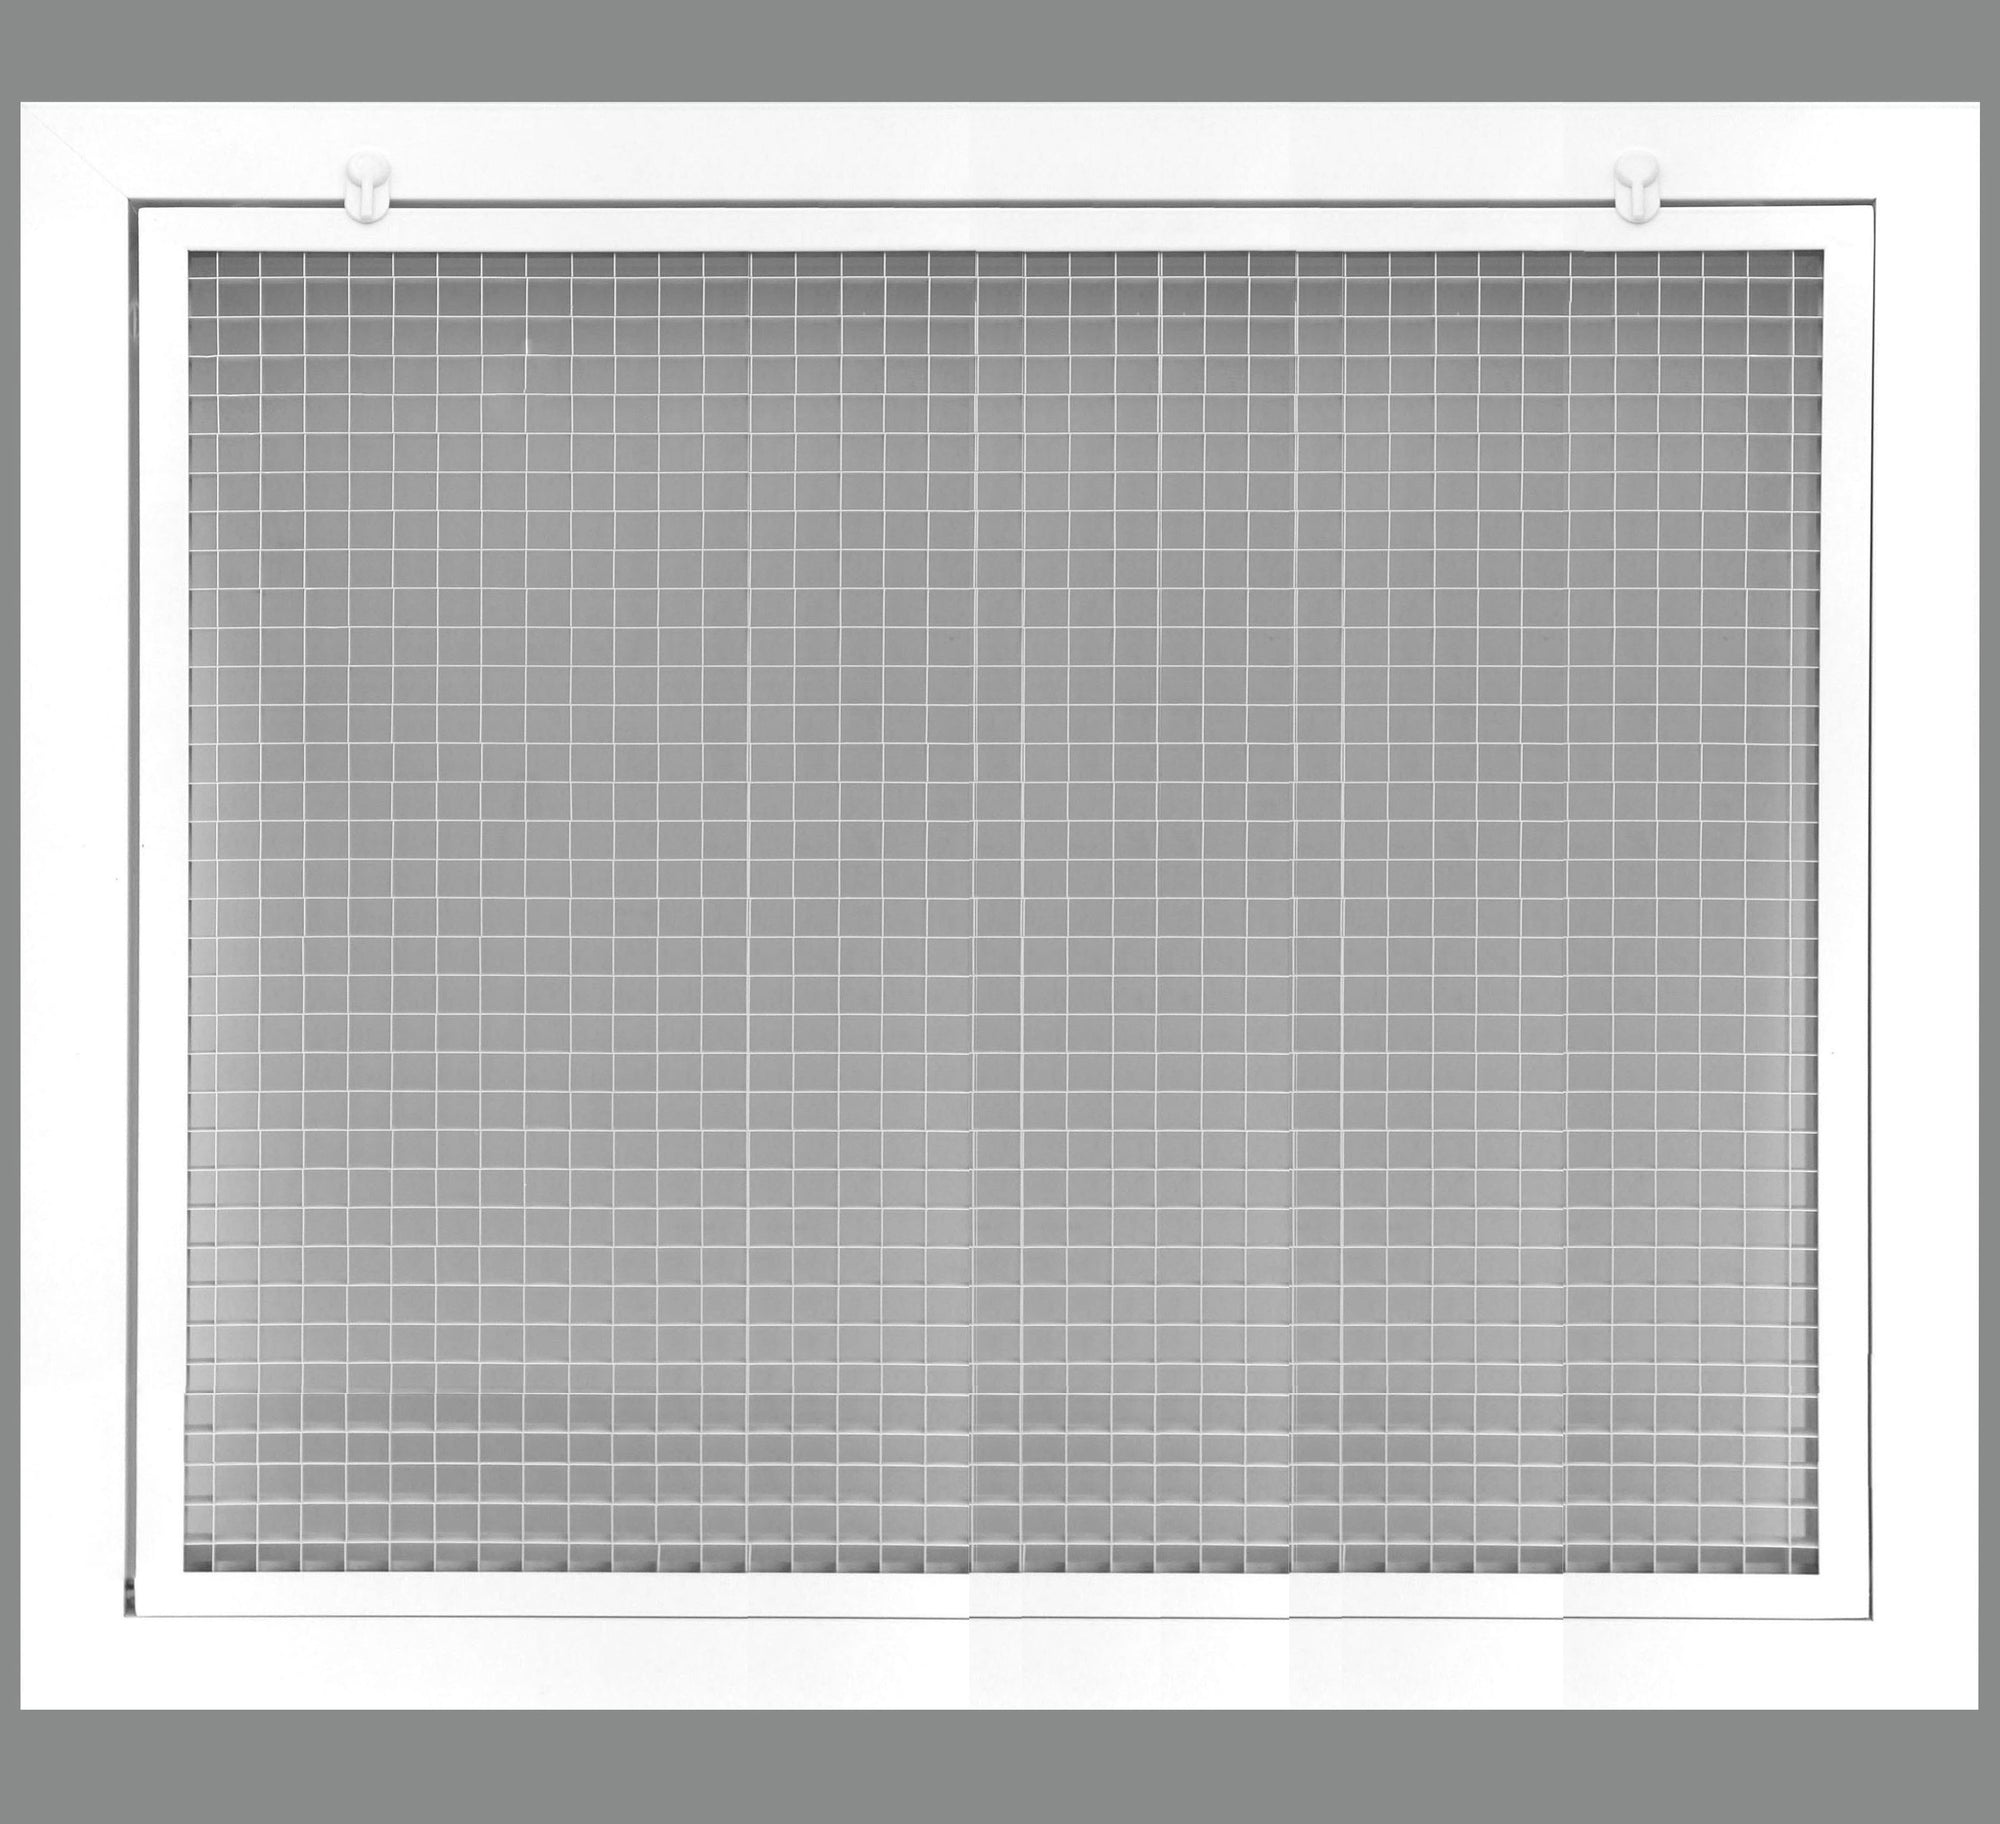 20" x 18" Cube Core Eggcrate Return Air Filter Grille for 1" Filter